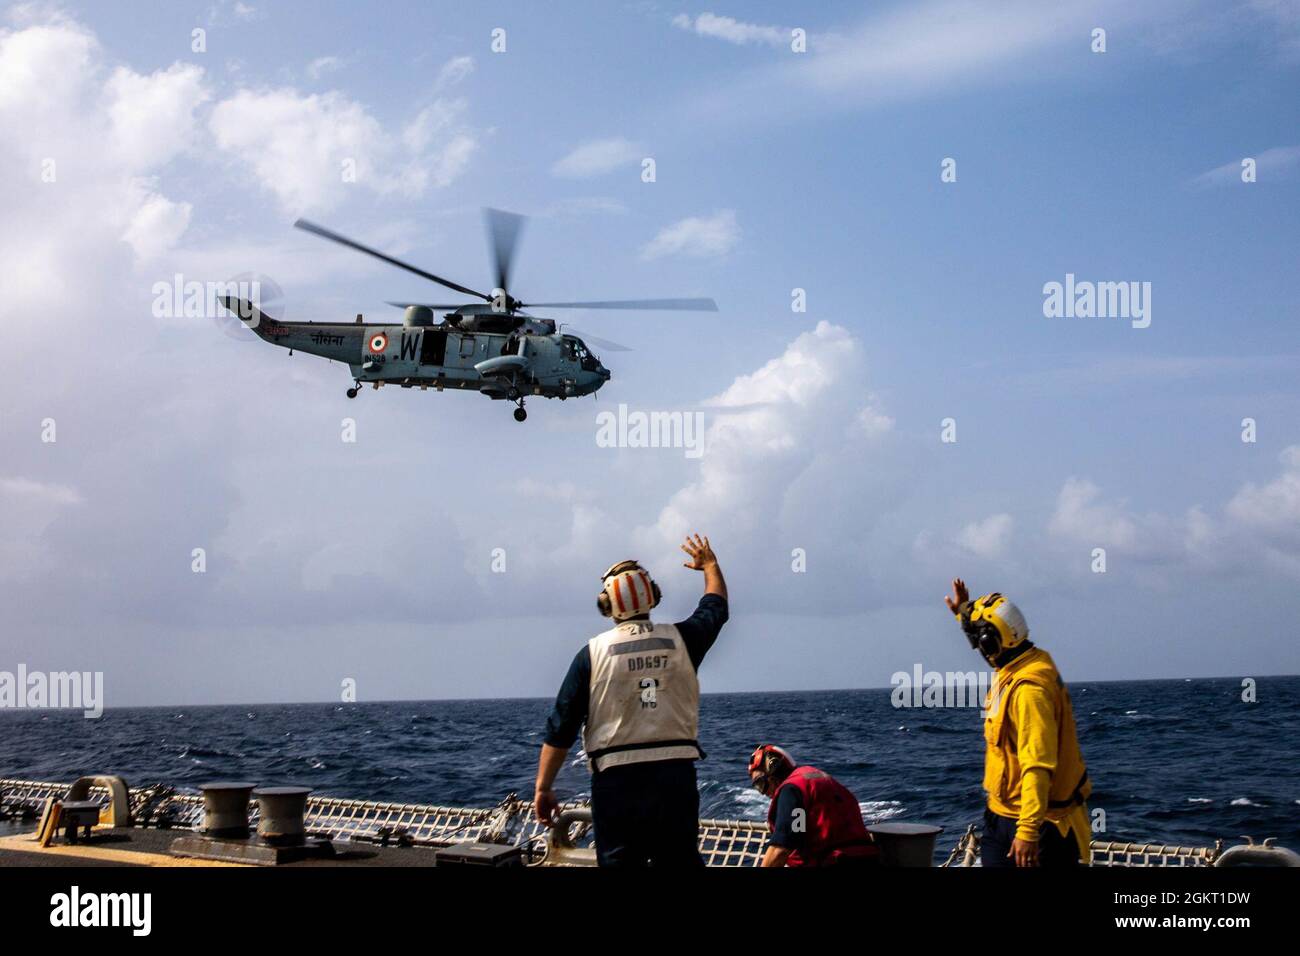 INDIAN OCEAN (June 24, 2021) – An SH-3 Sea King, assigned to the Indian Naval Air Arm, flies past the Arleigh Burke-class guided-missile destroyer USS Halsey (DDG 97) during a bilateral exercise. Halsey is attached to Commander, Task Force 70/Carrier Strike Group 5 conducting underway operations in support of a free and open Indo-Pacific. Stock Photo